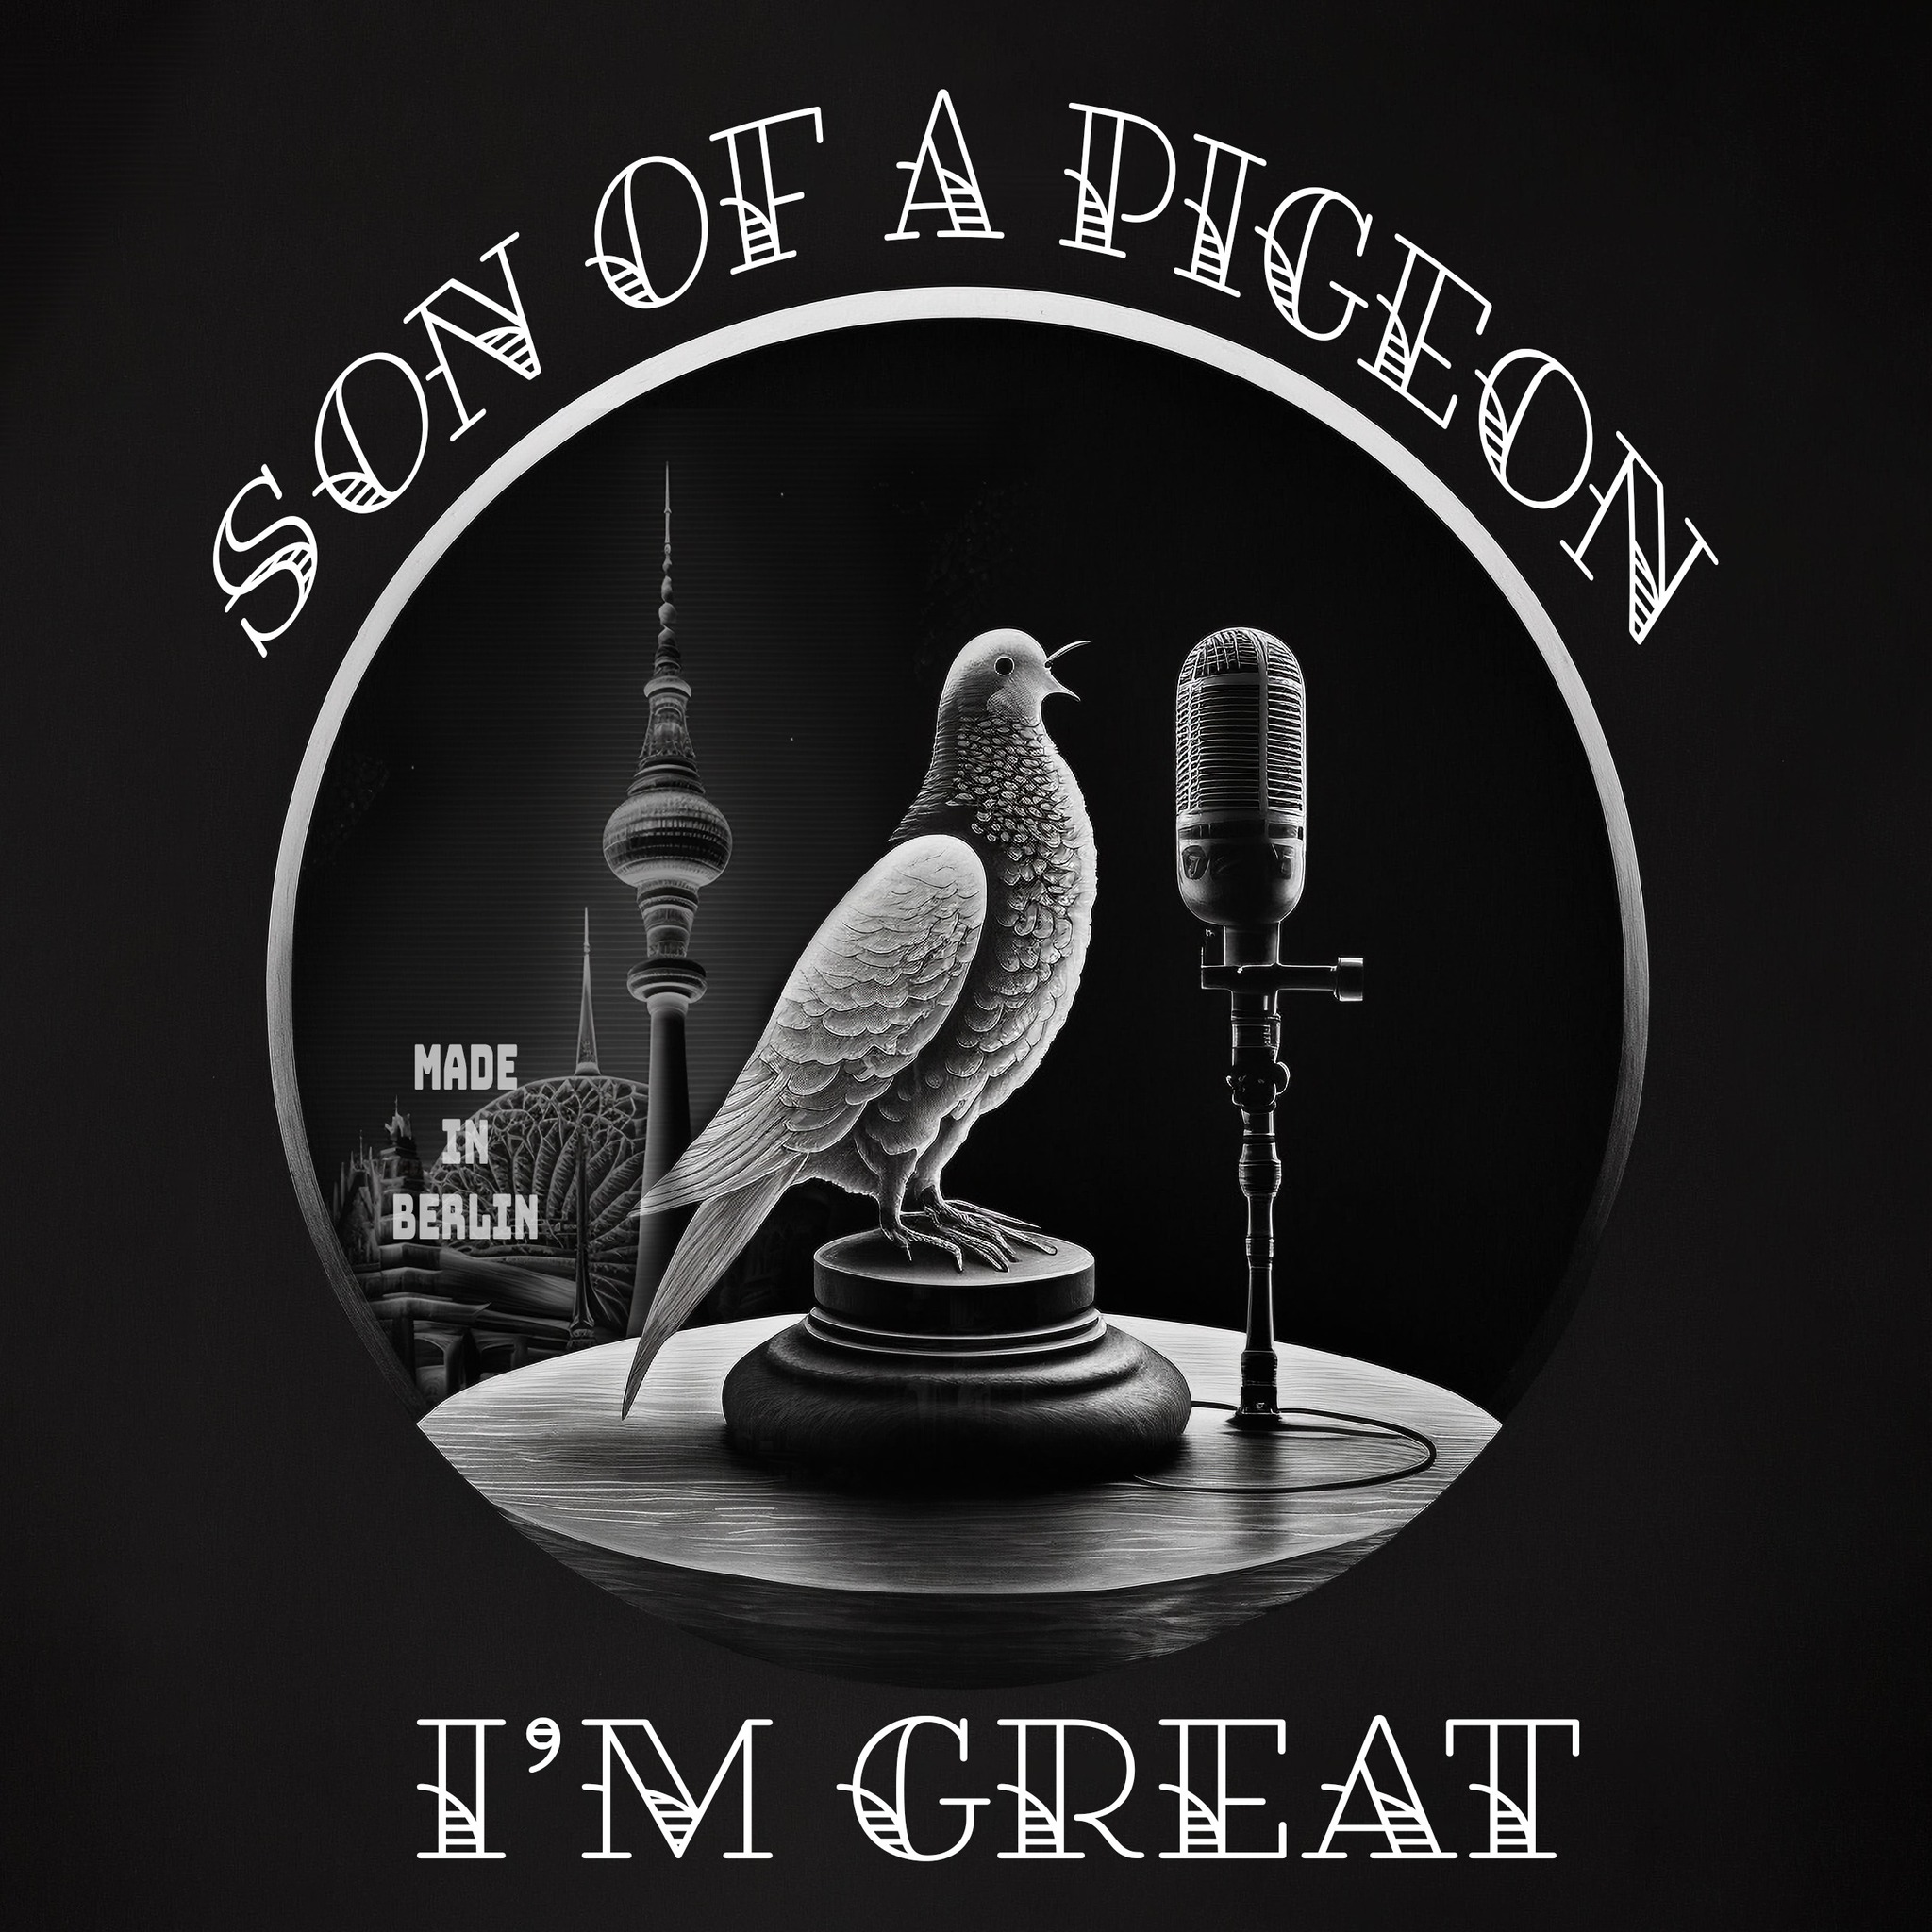 “Son of a Pigeon” is a Berlin-based artist, producer, performer and songwriter who unleashes new single ‘I’m Great’.